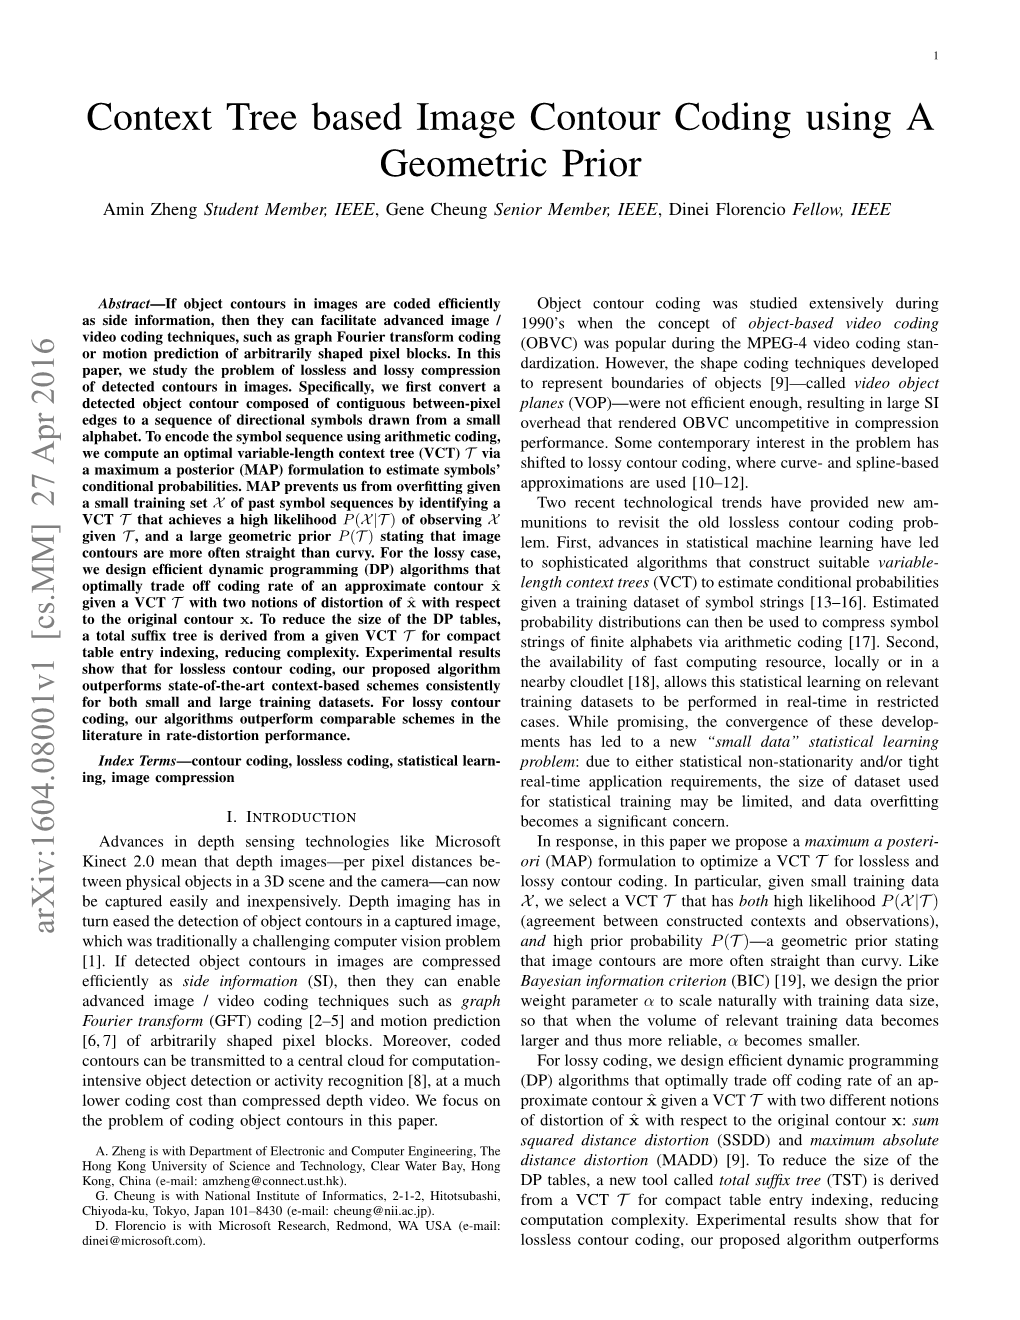 Context Tree Based Image Contour Coding Using a Geometric Prior Amin Zheng Student Member, IEEE, Gene Cheung Senior Member, IEEE, Dinei Florencio Fellow, IEEE